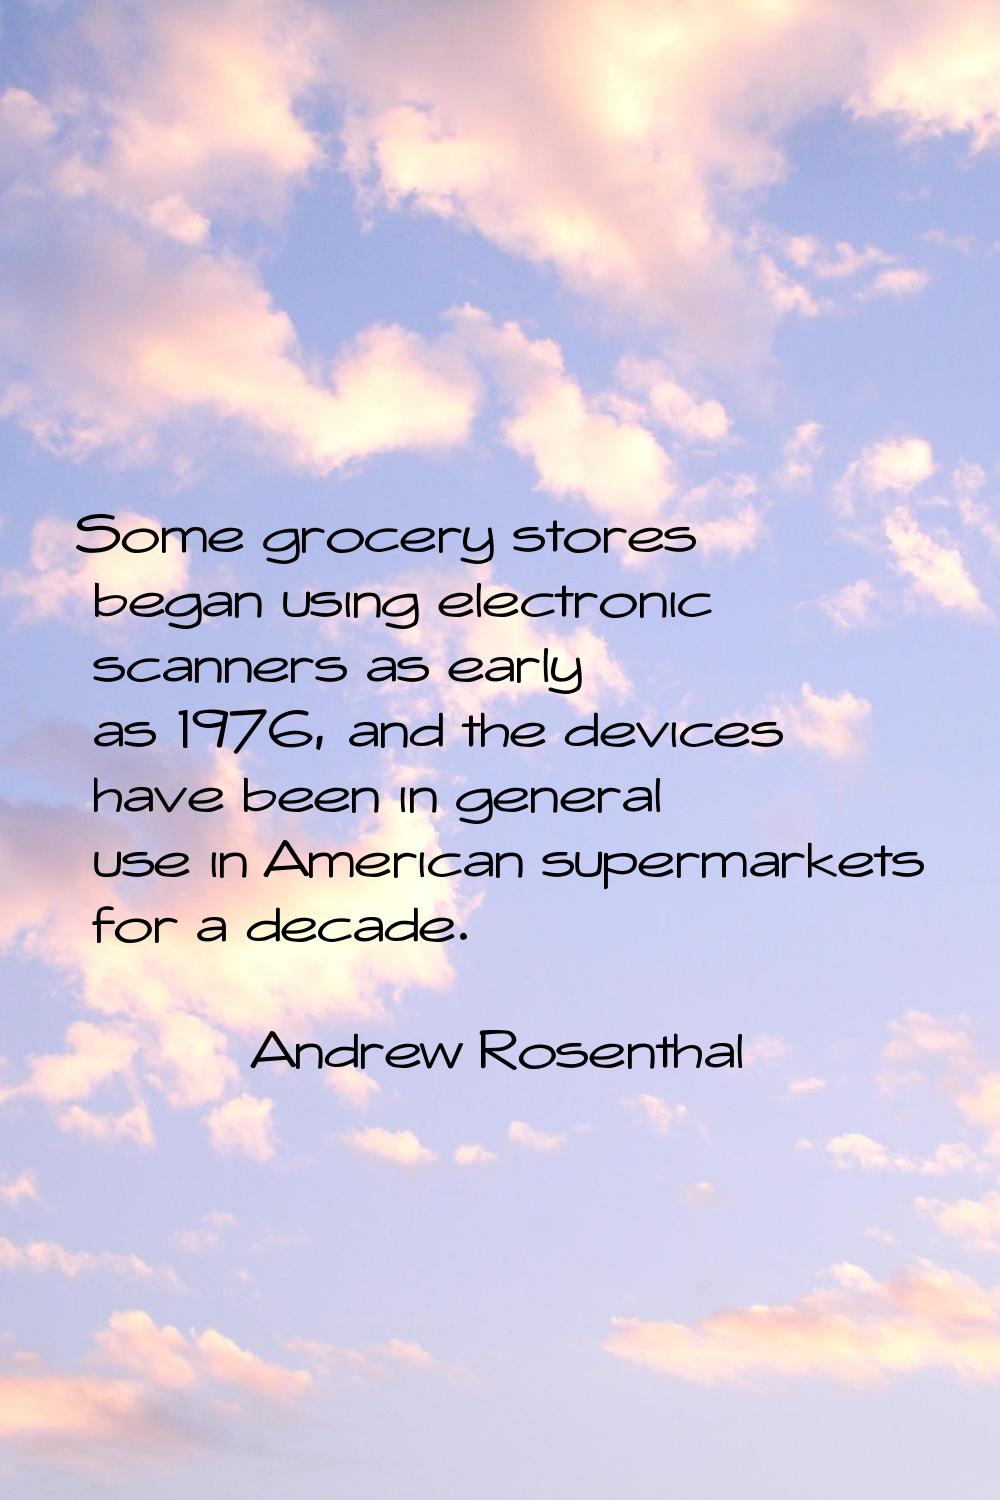 Some grocery stores began using electronic scanners as early as 1976, and the devices have been in 